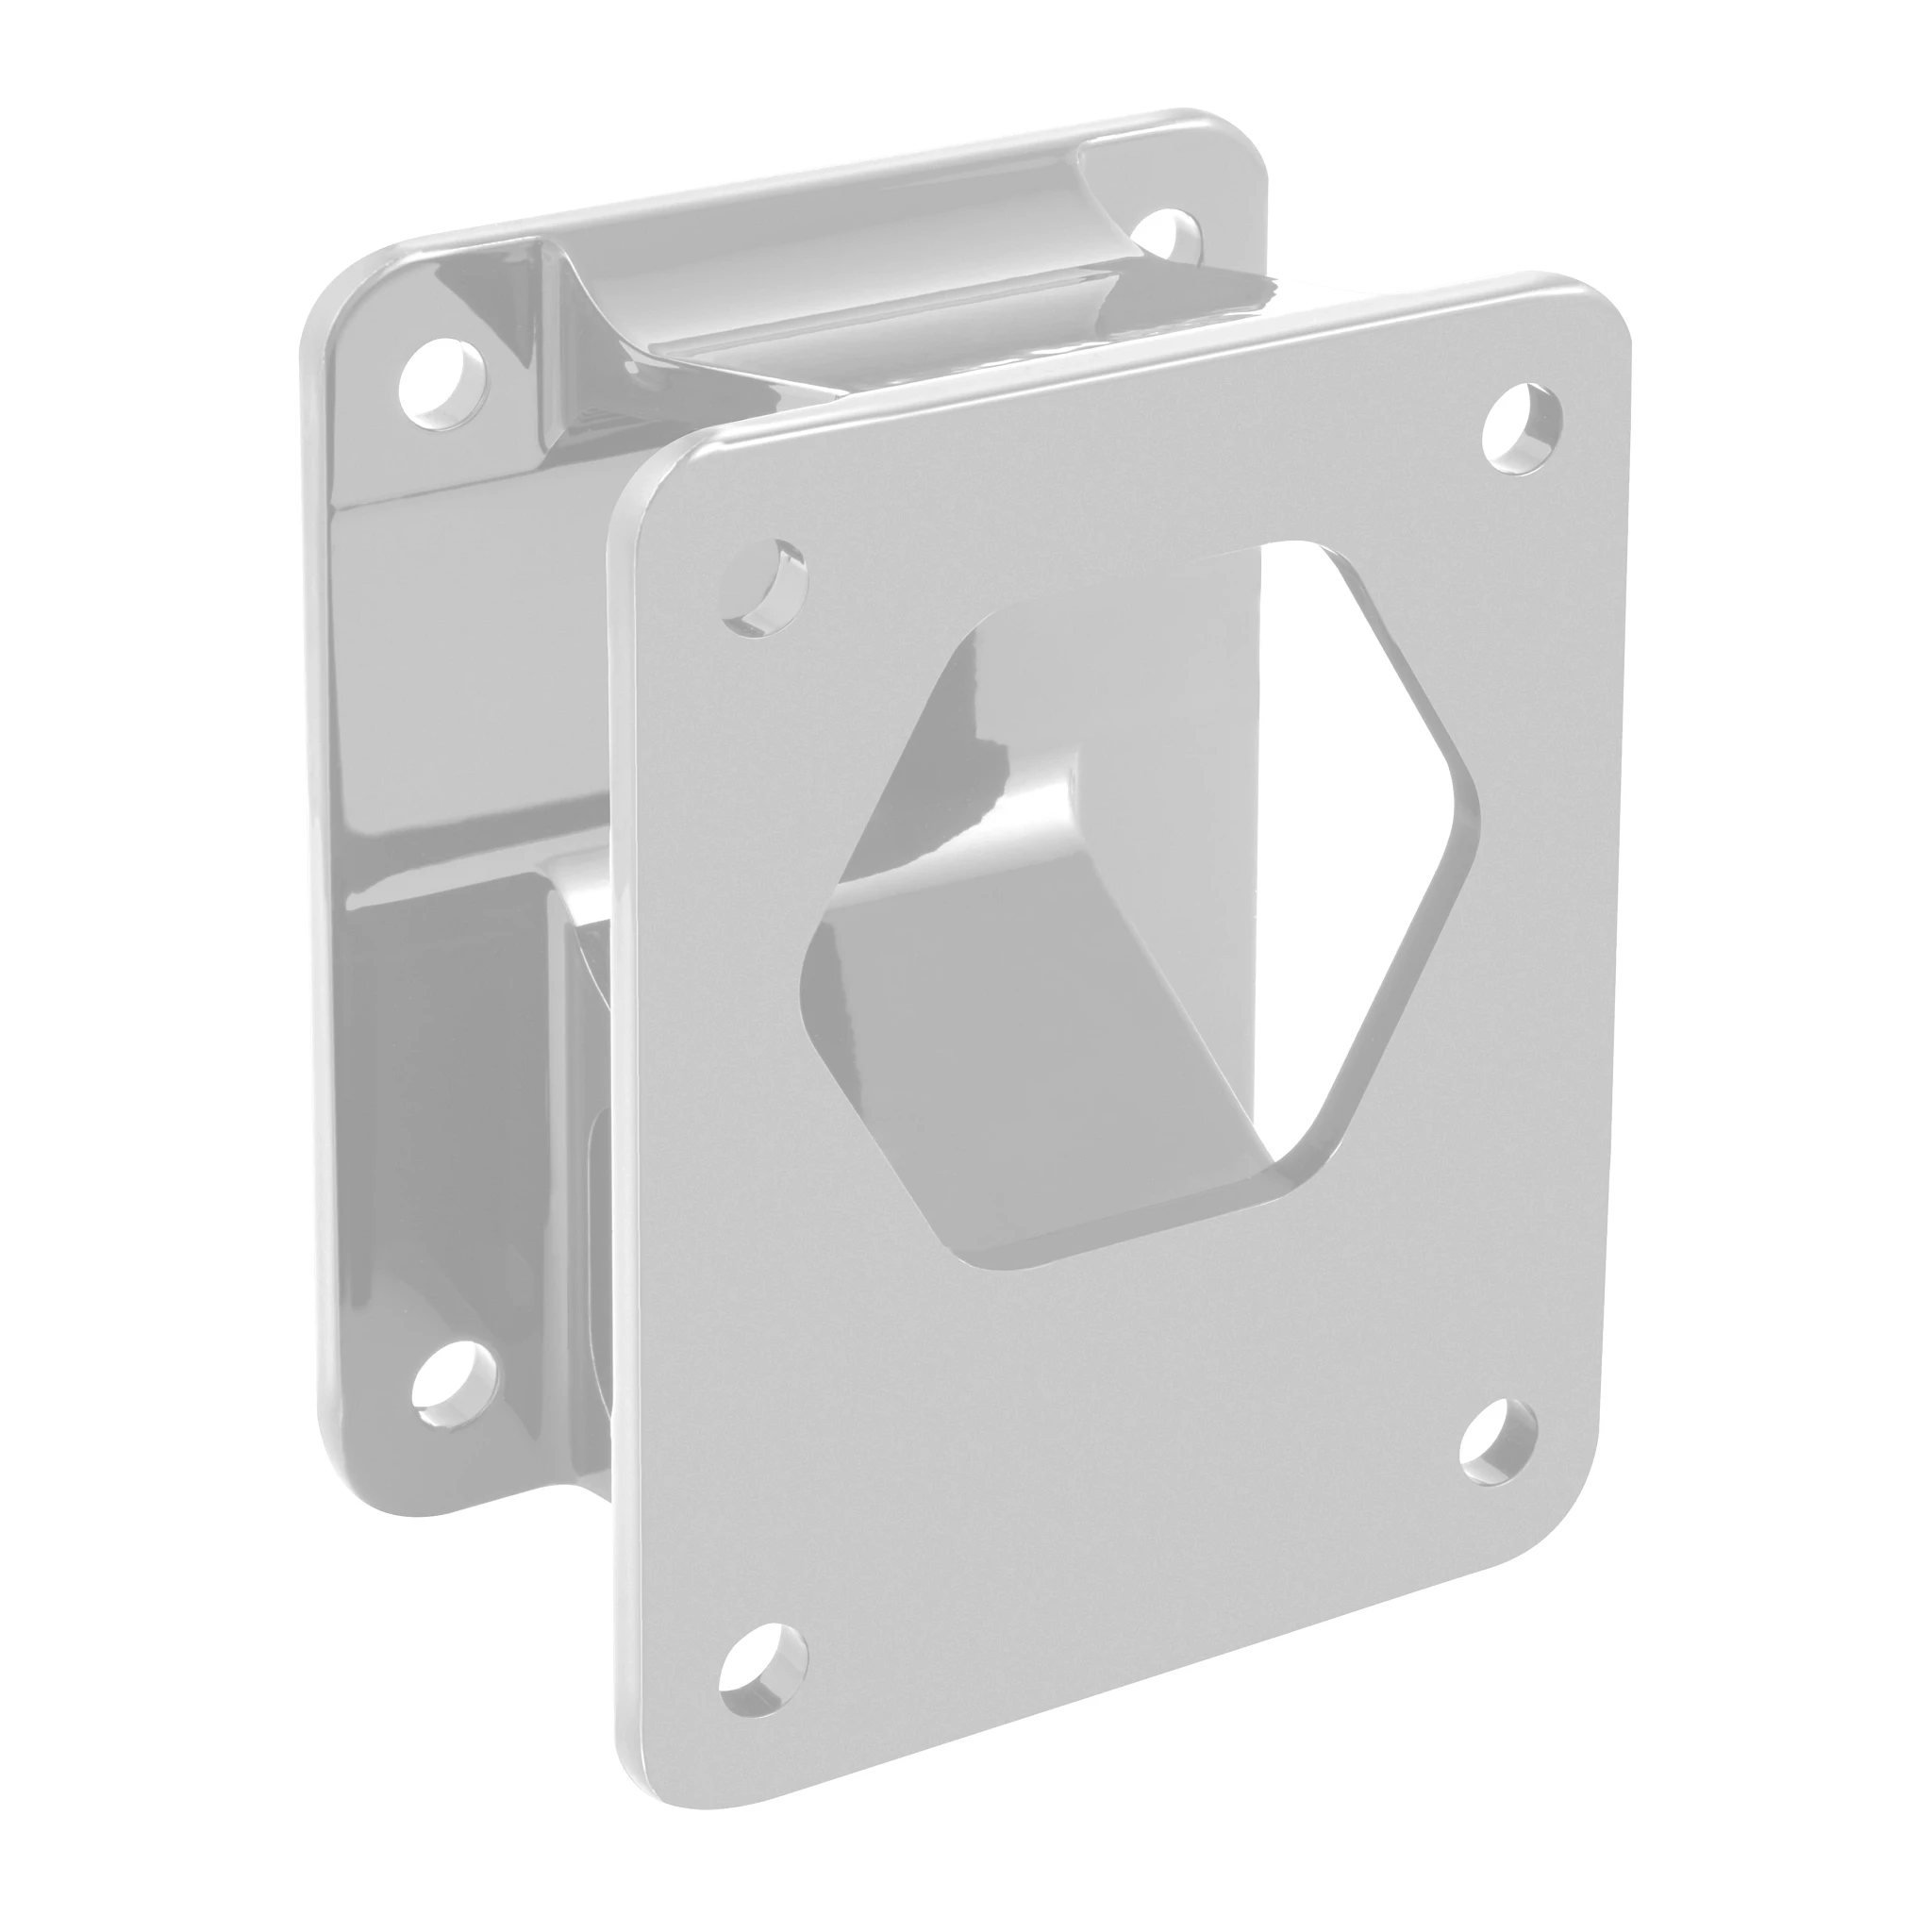 Angled view of white, setback bracket for Raptor shallow water anchor